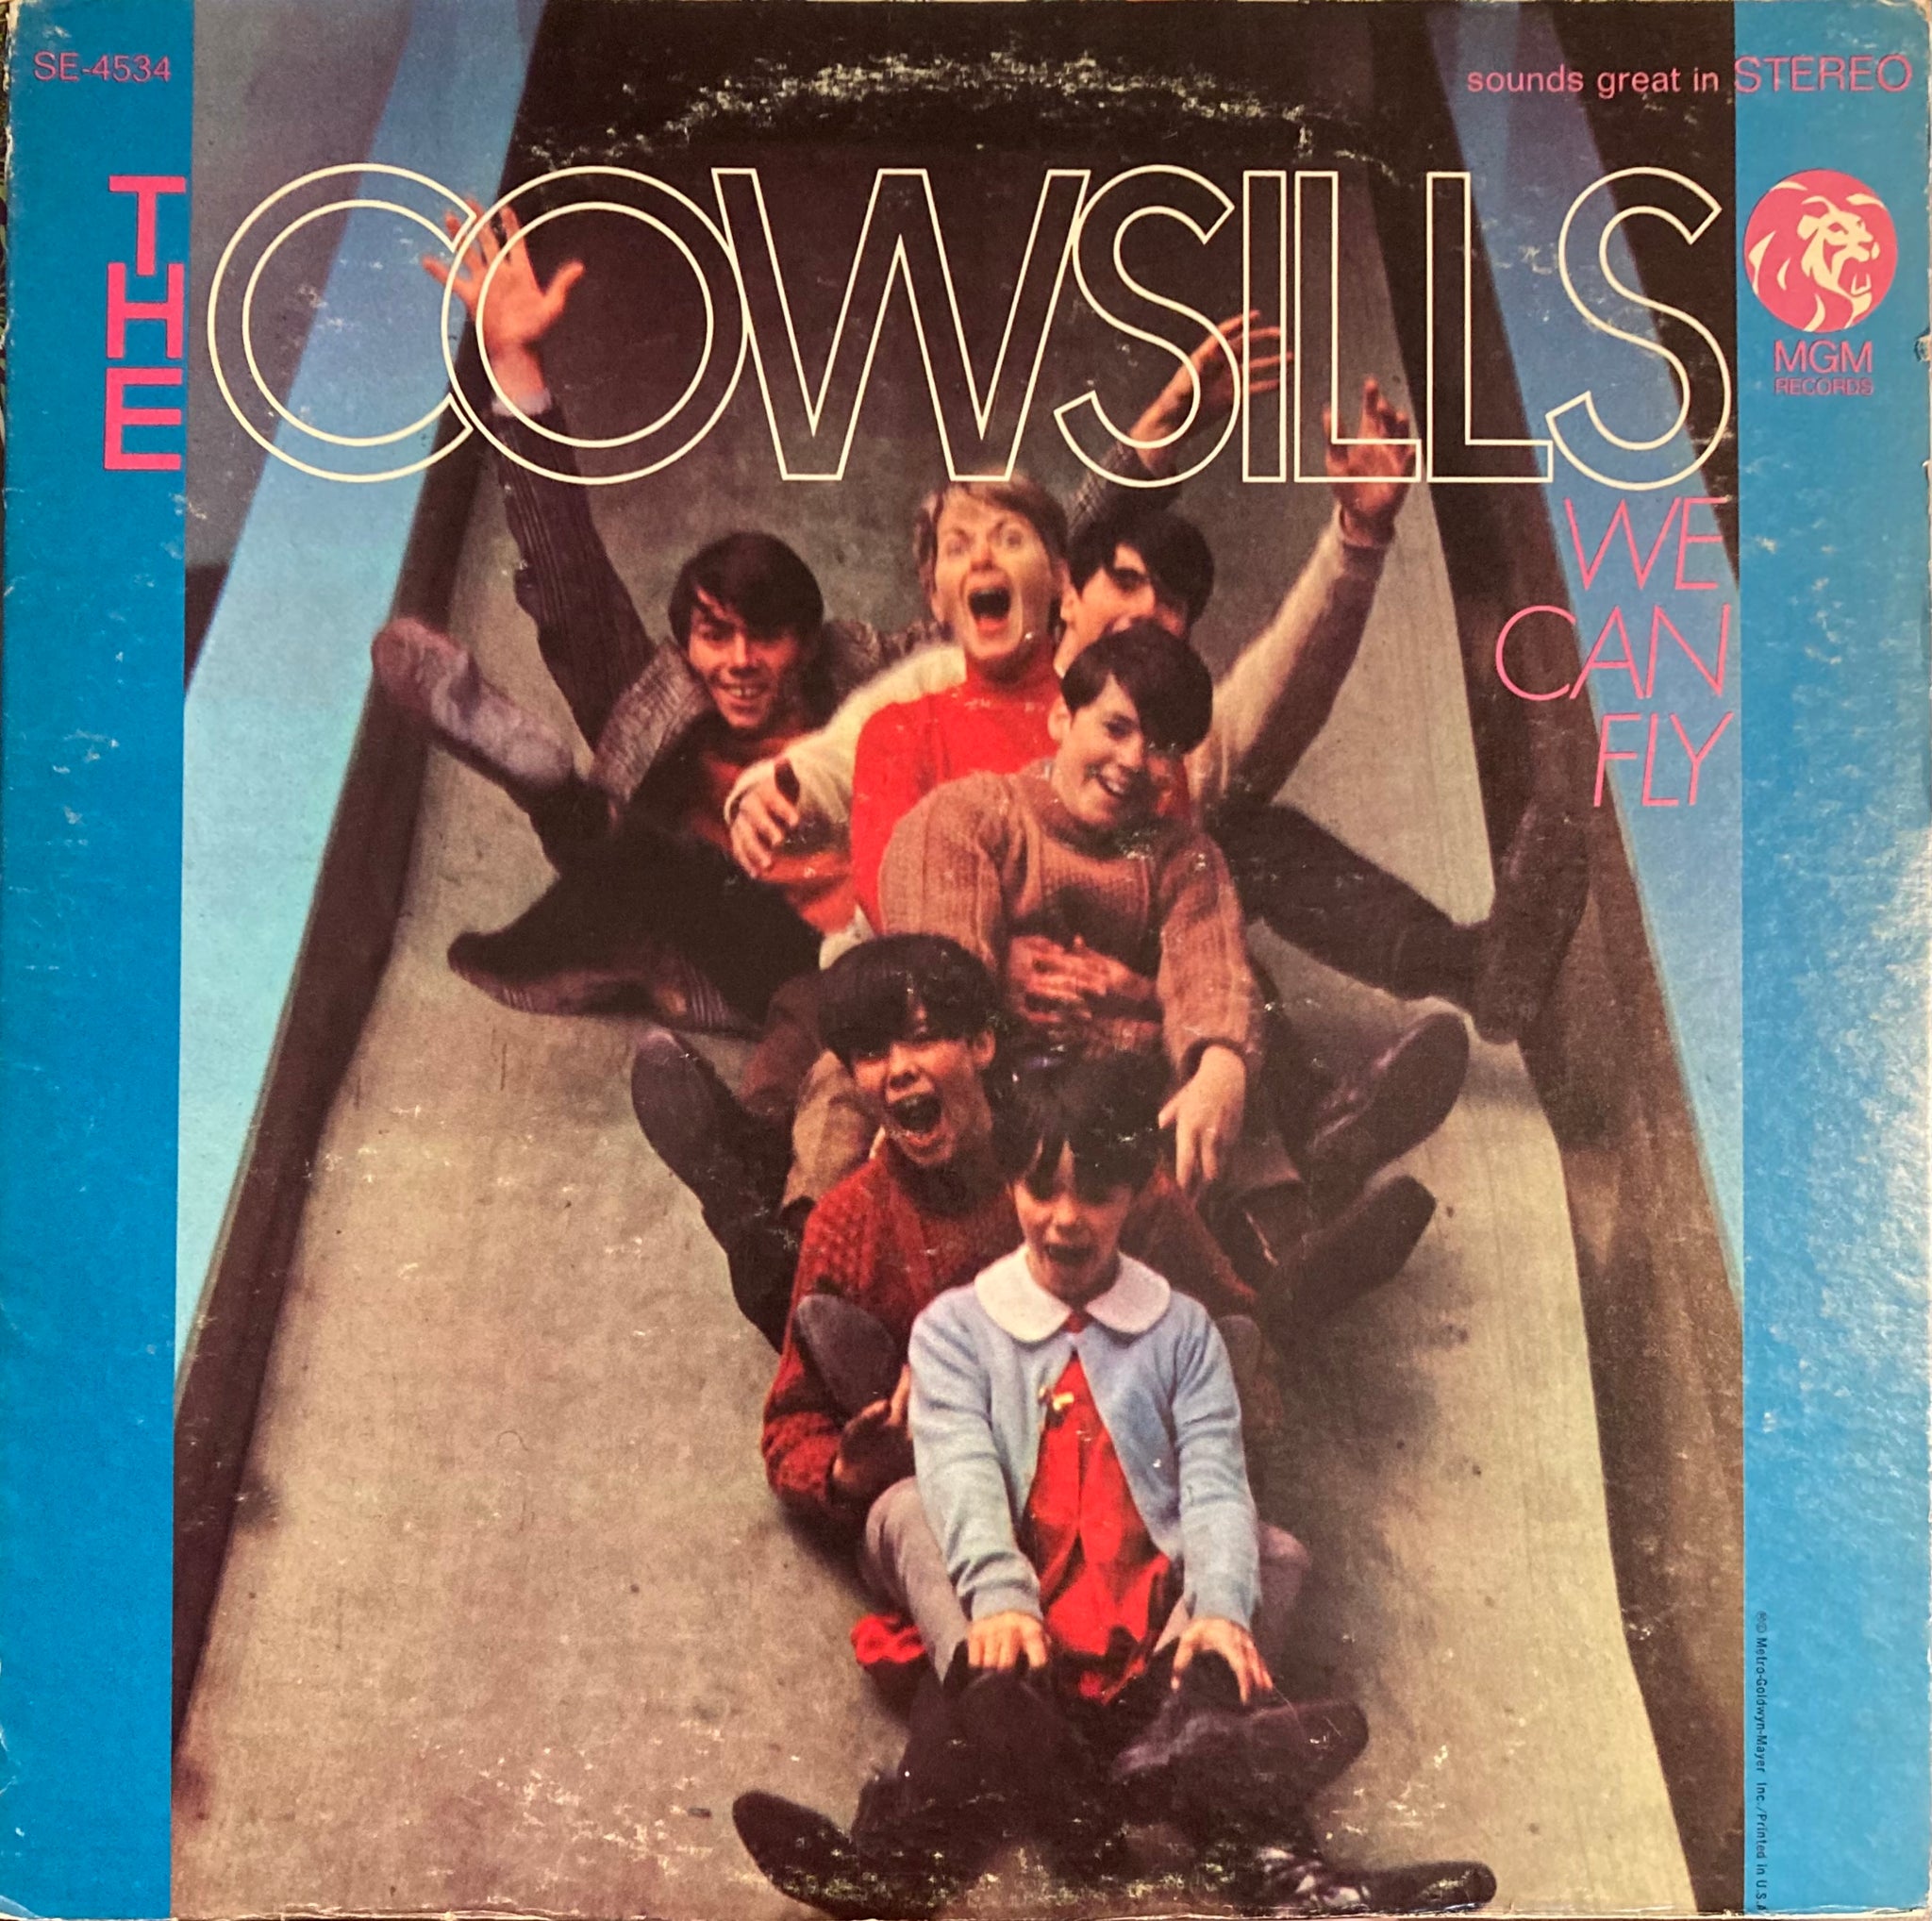 Cowsills “We Can Fly” LP (1968)